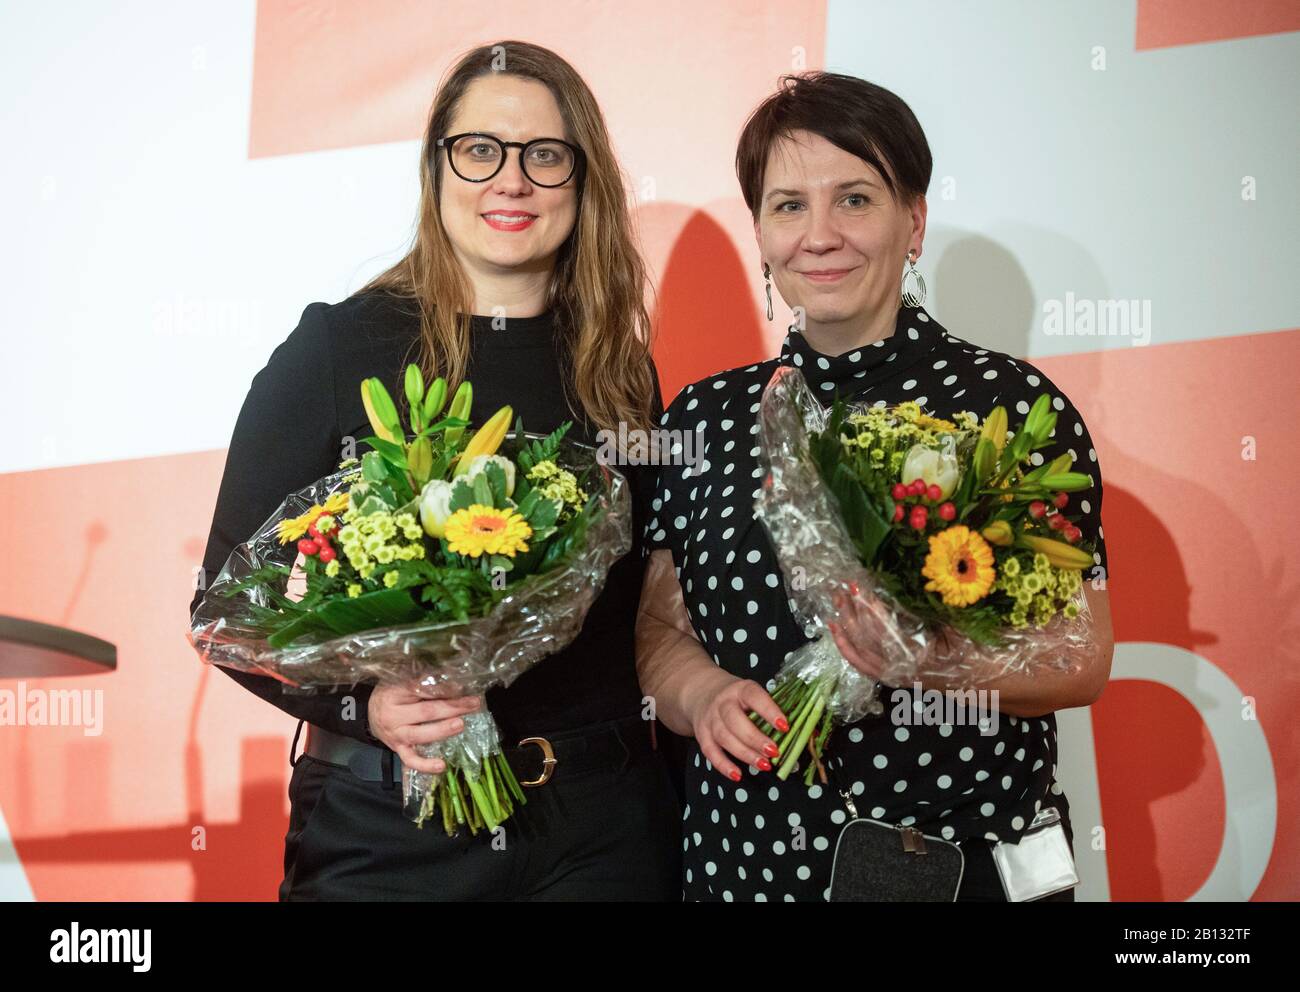 Templin, Germany. 22nd Feb, 2020. Anja Mayer (l), and Katharina Slanina, newly elected state chairwoman of the party Die Linke in Brandenburg, stand after the election with flowers at the state party conference of Die Linke in Brandenburg. Credit: Christophe Gateau/dpa/Alamy Live News Stock Photo